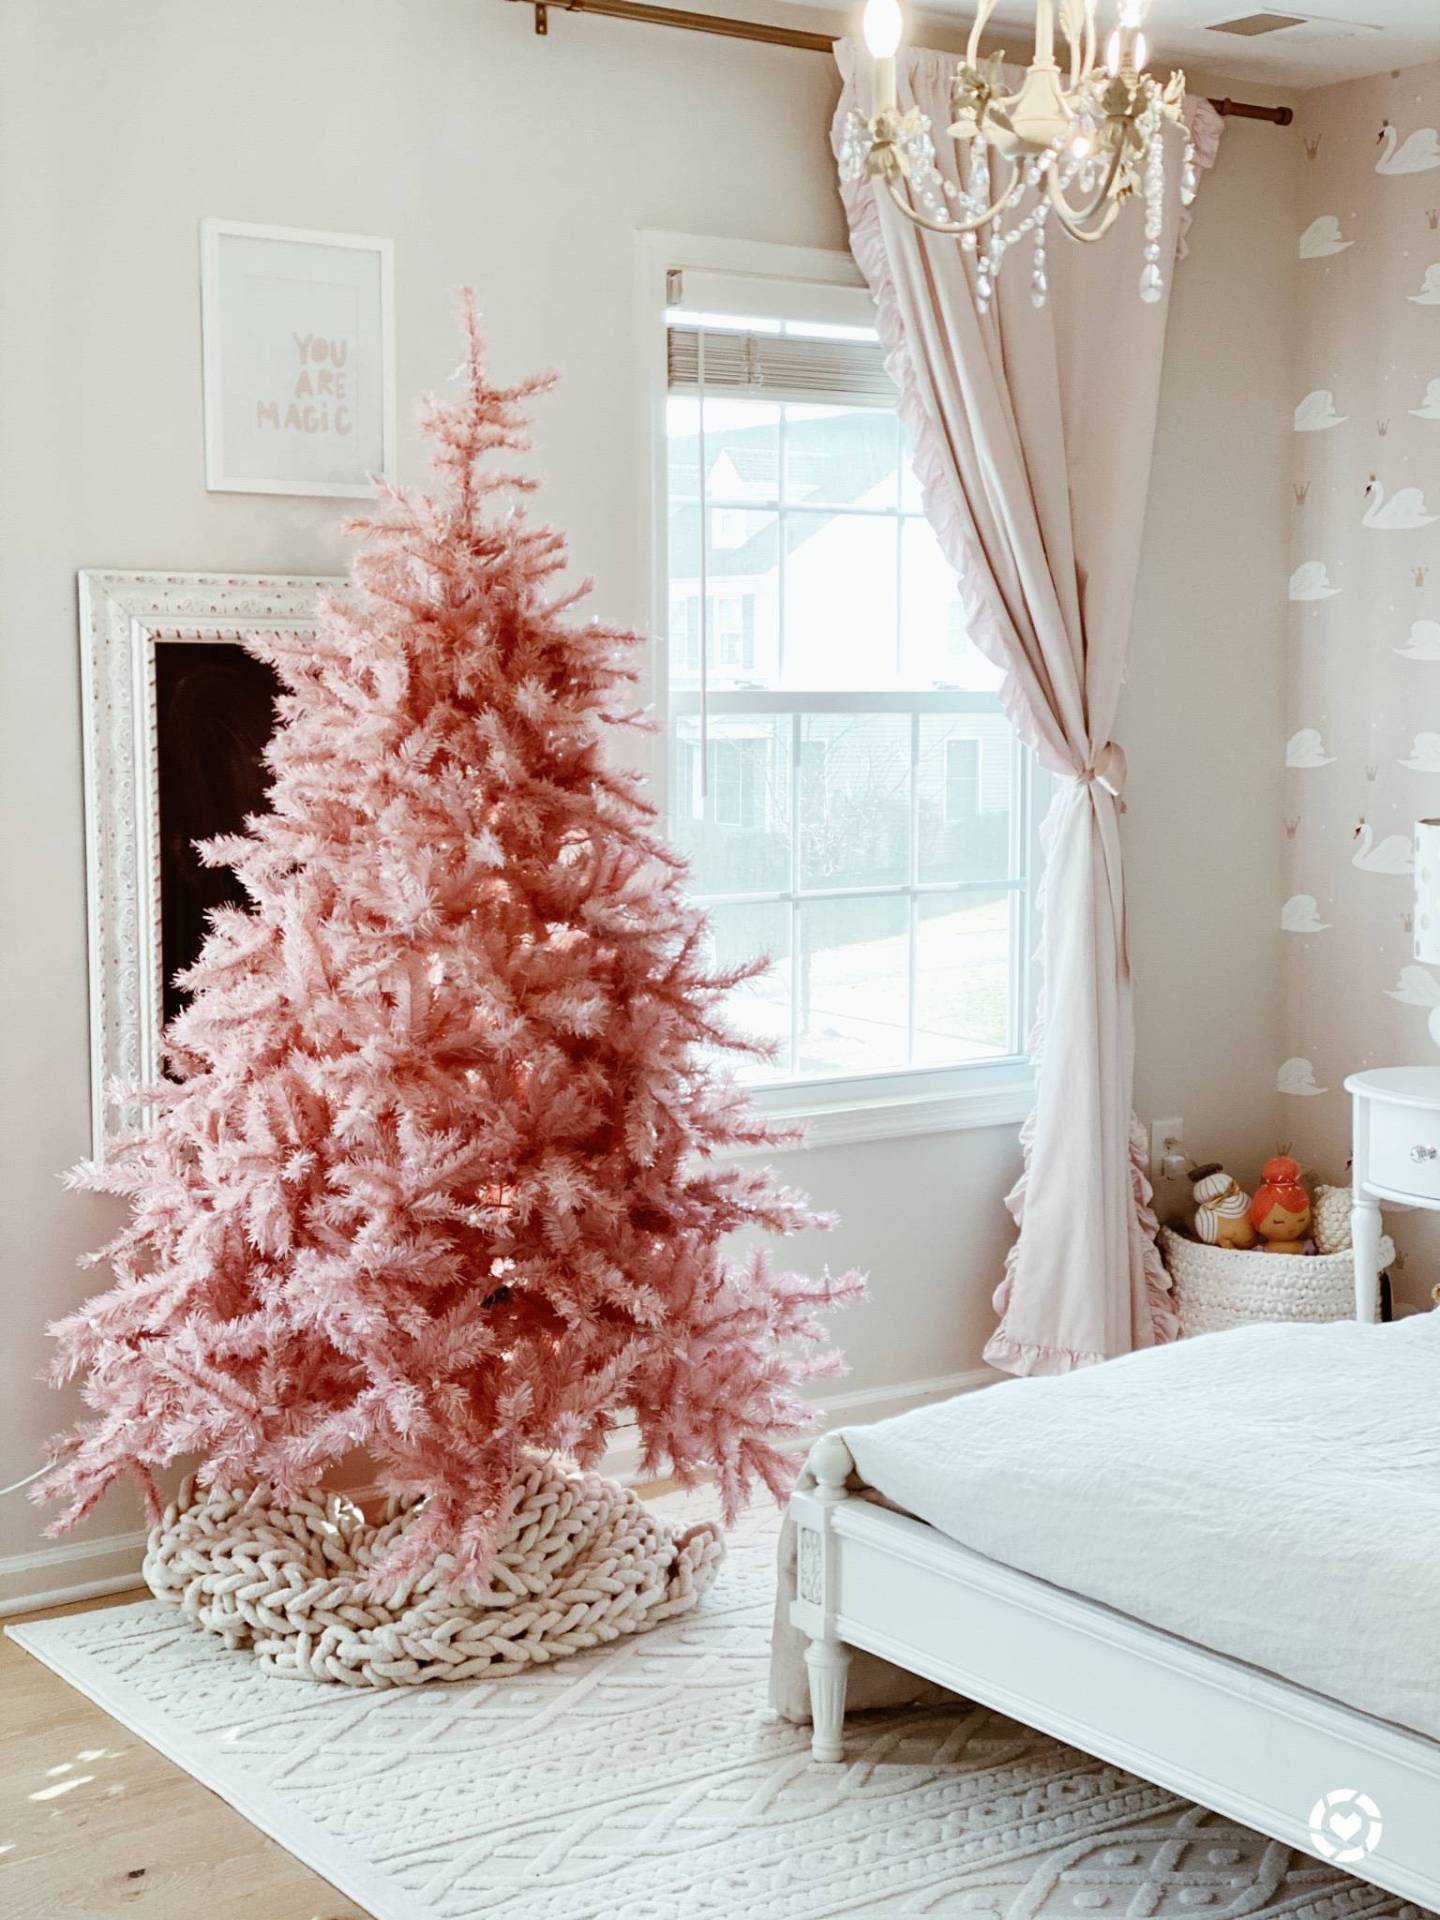 Where Can I Buy A Pink Christmas Tree?